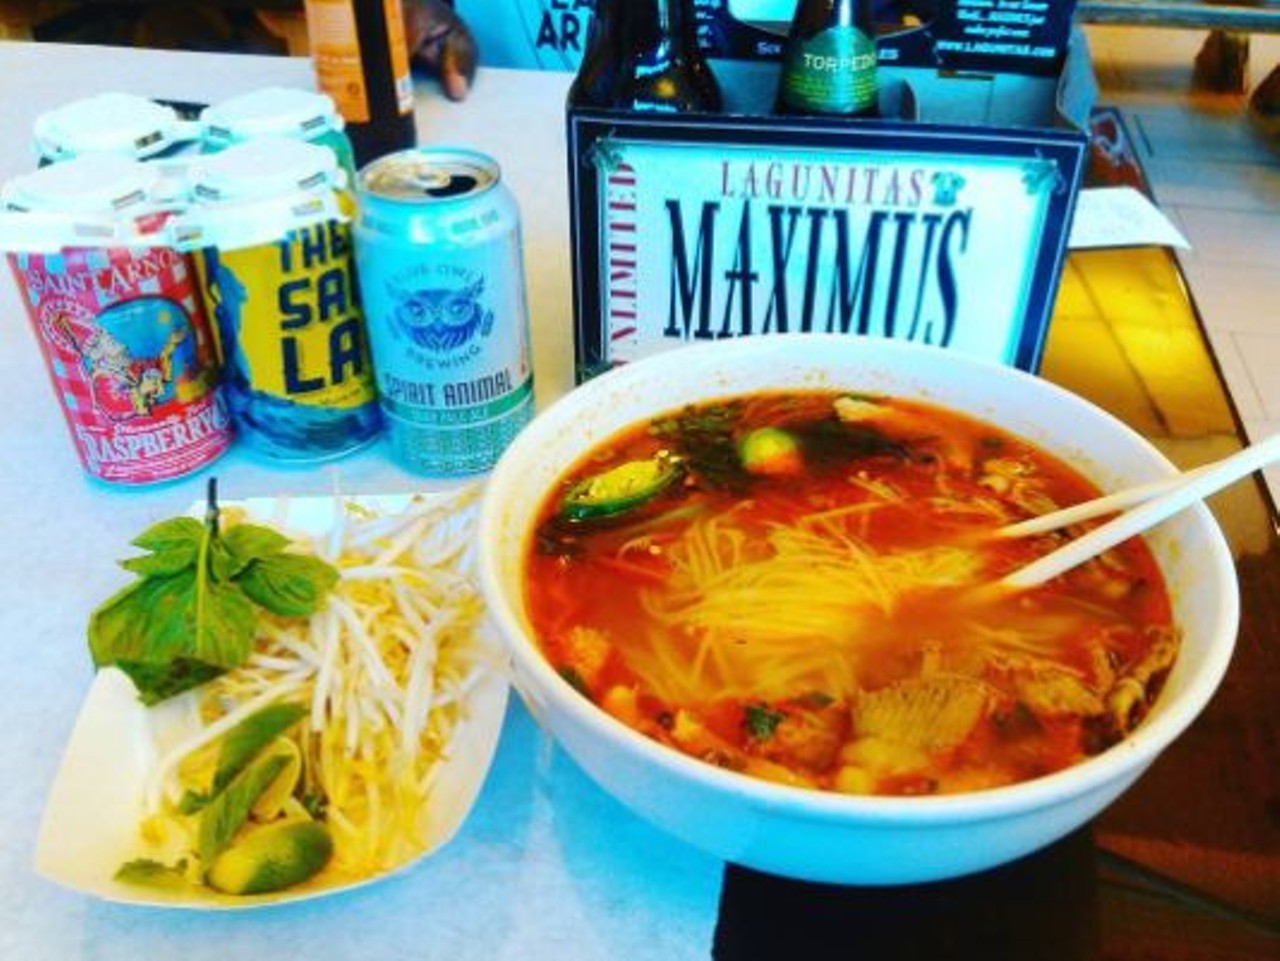 LA Crawfish 
10919 Culebra Road, (210) 688-9123 
Cajun food and beer is a perfect duo. Enjoy some Cajun and Asian inspired dishes while sipping on an ice-cold brew.
Photo via Instagram, thebrink1